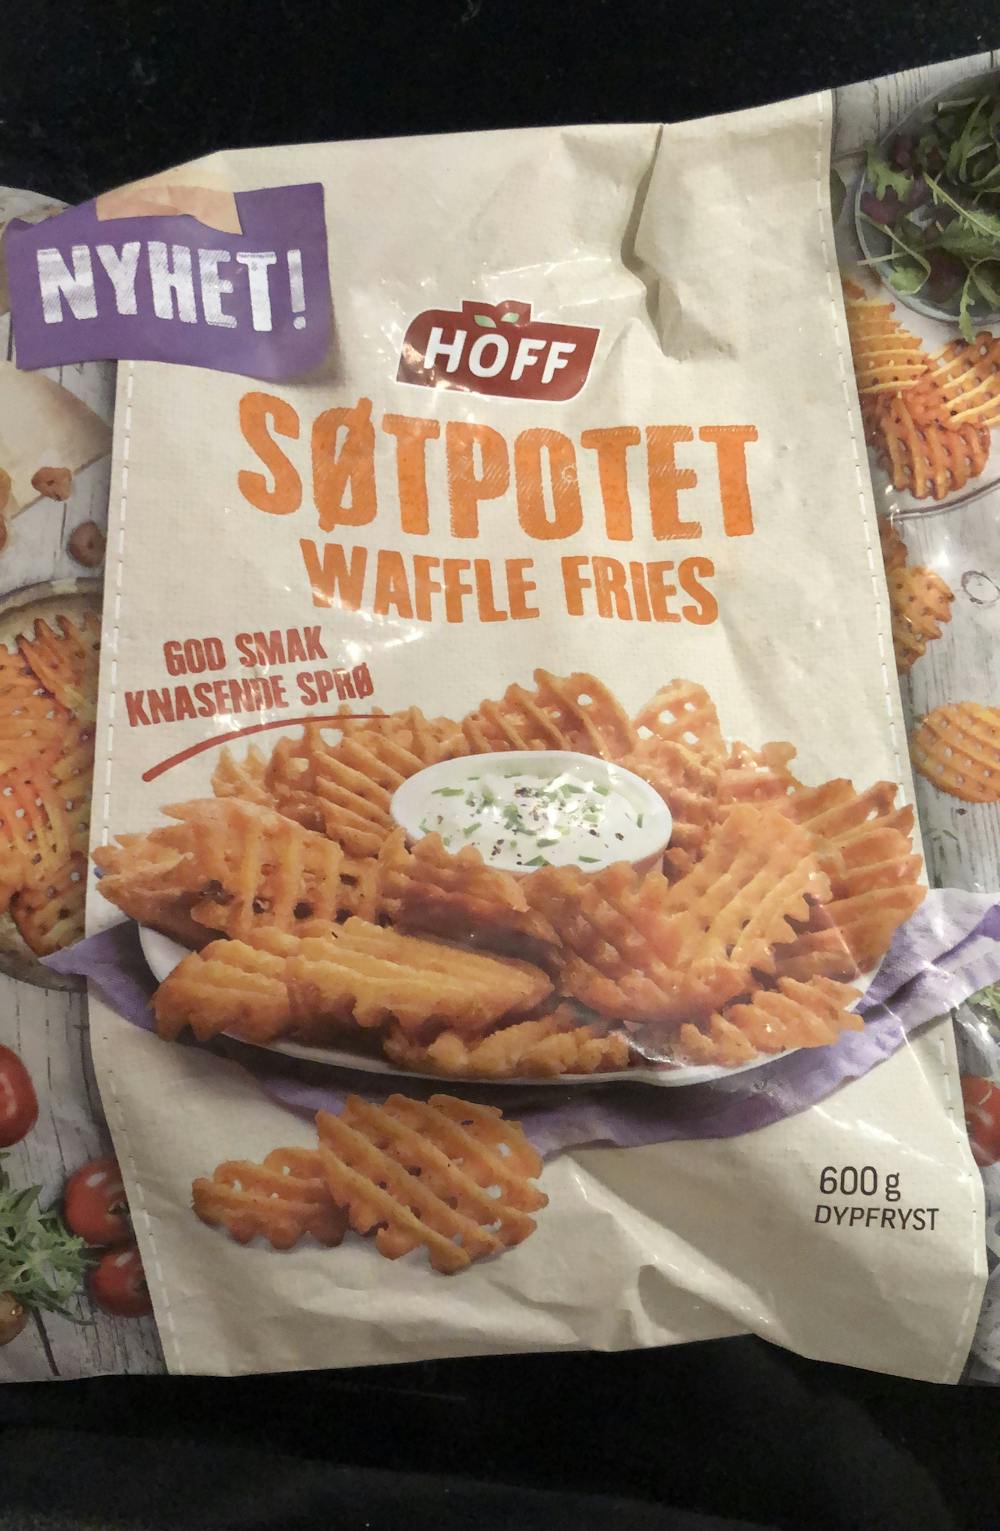 Søtpotet waffle fries, Hoff